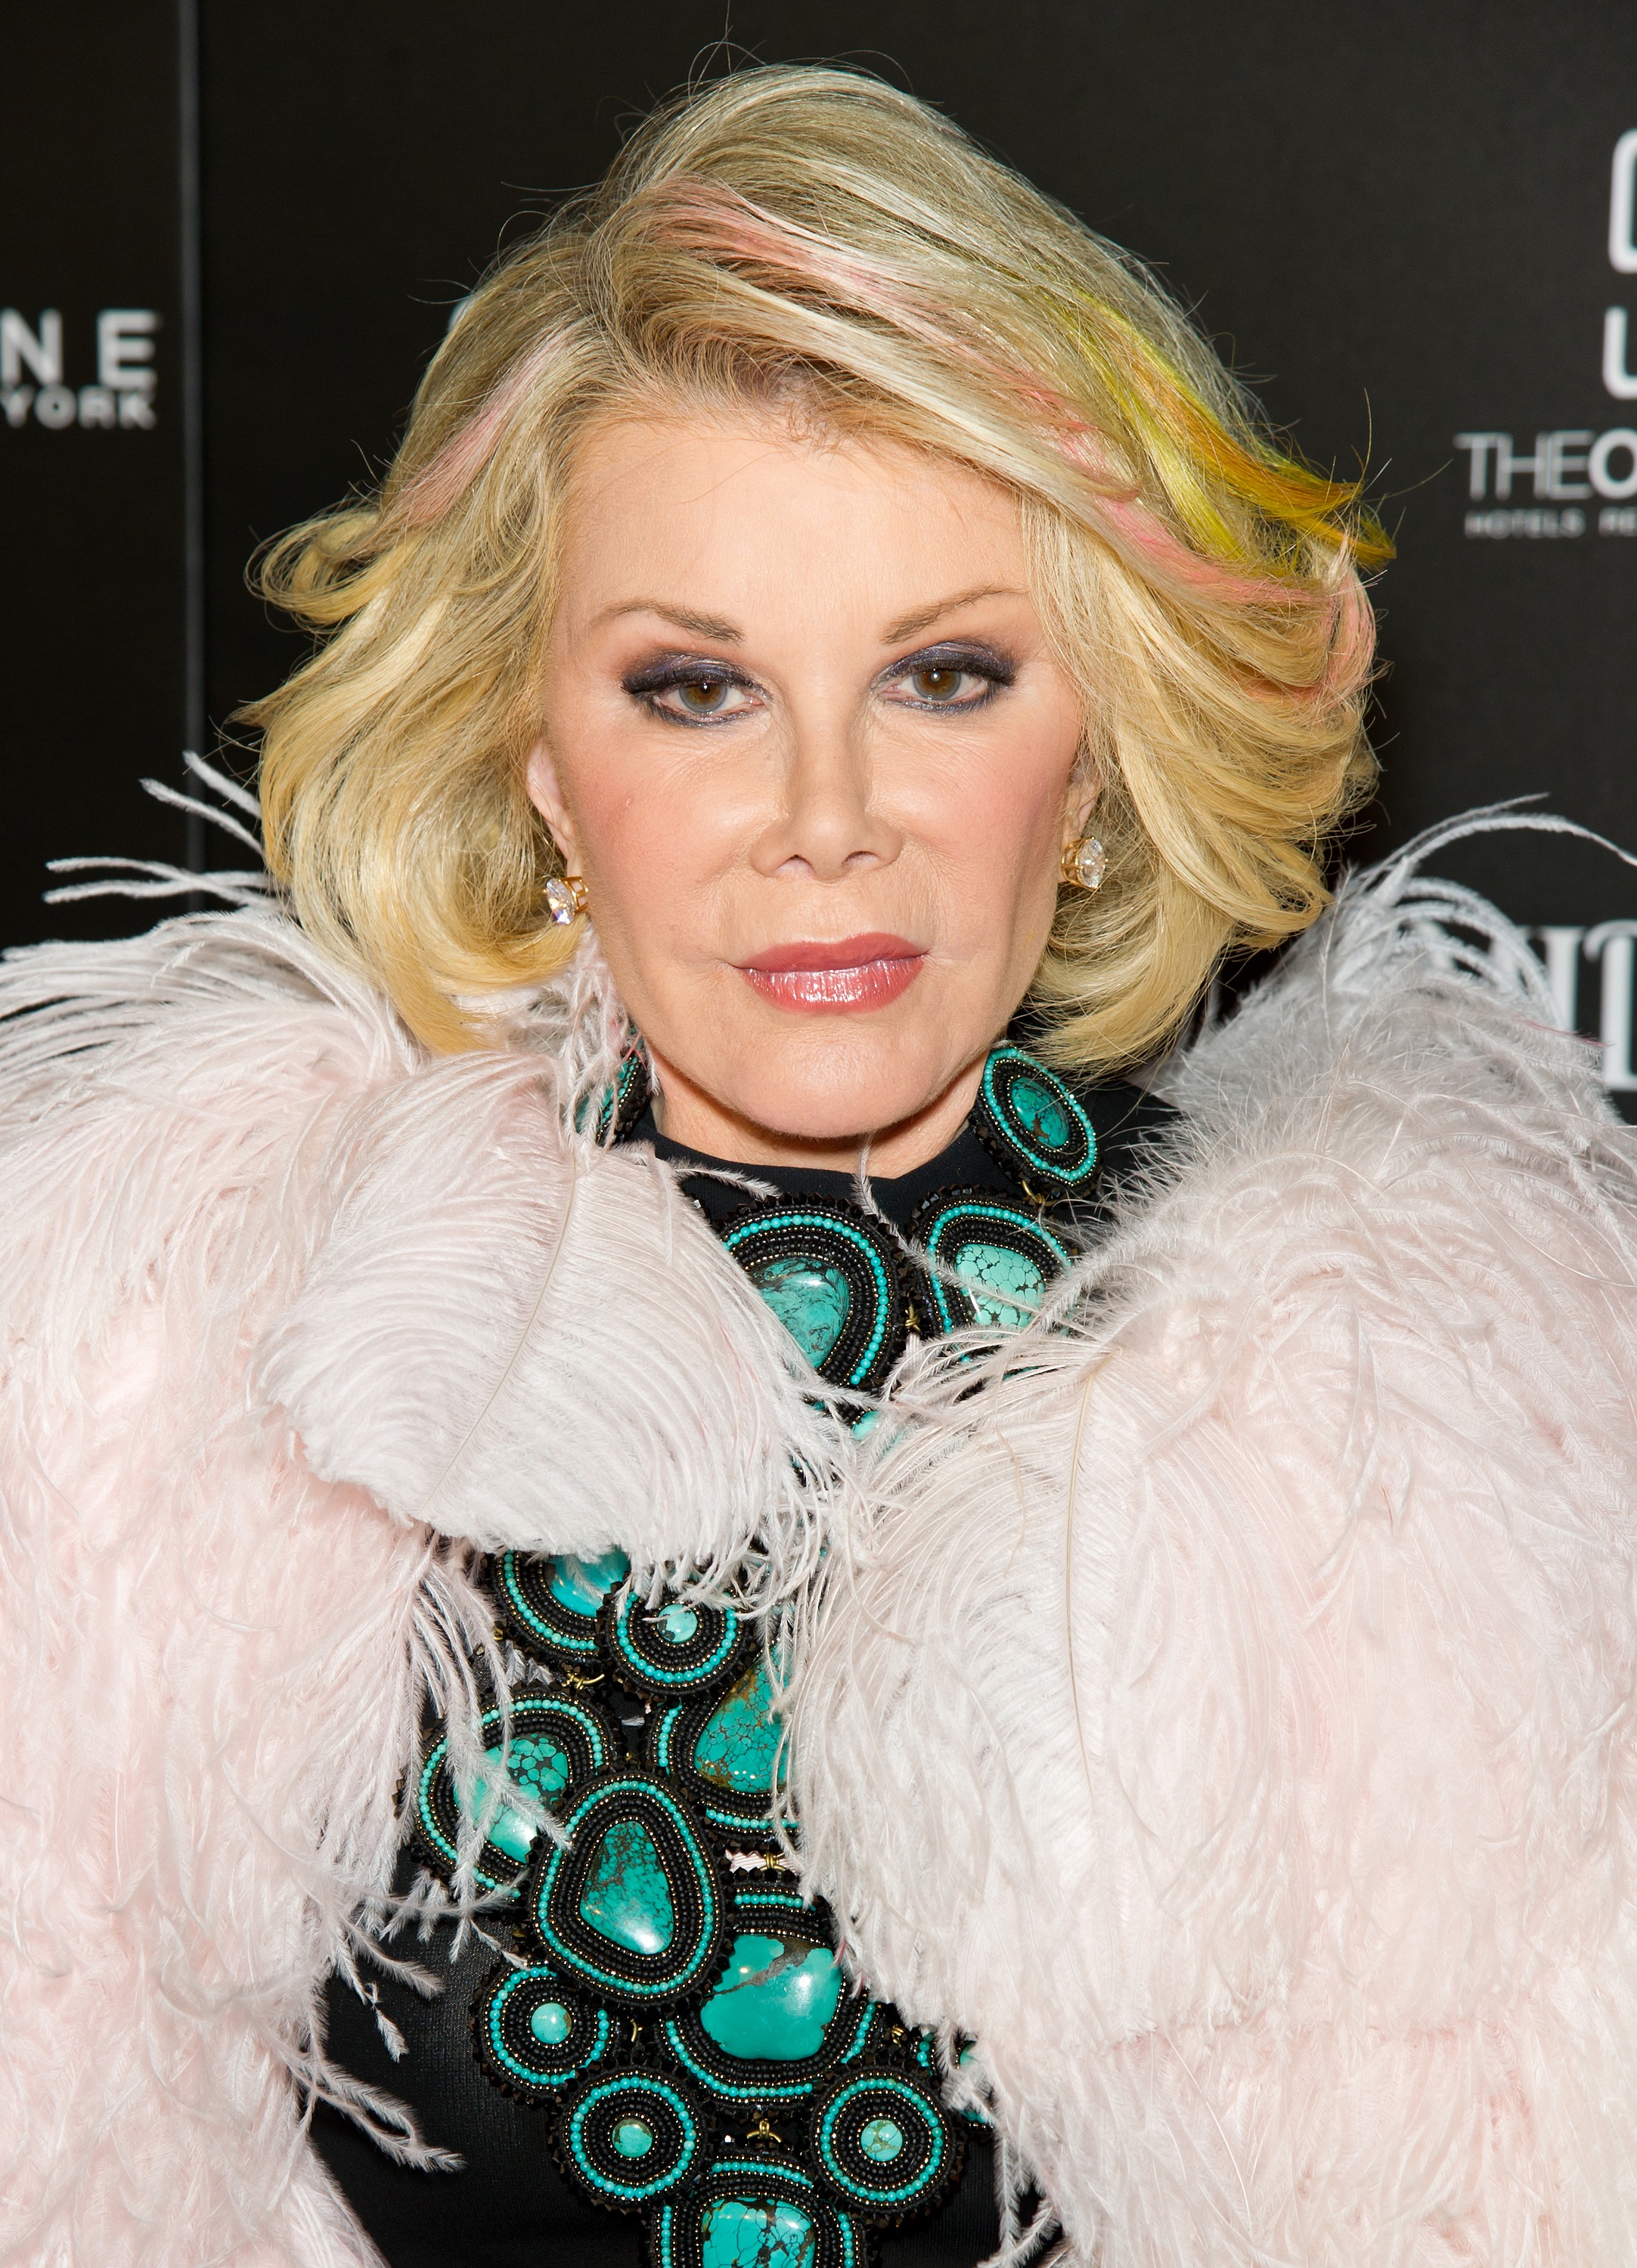 Joan Rivers attends Us Weekly's 25 Most Stylish New Yorkers Event in New York City, on September 12, 2012. | Source: Getty Images